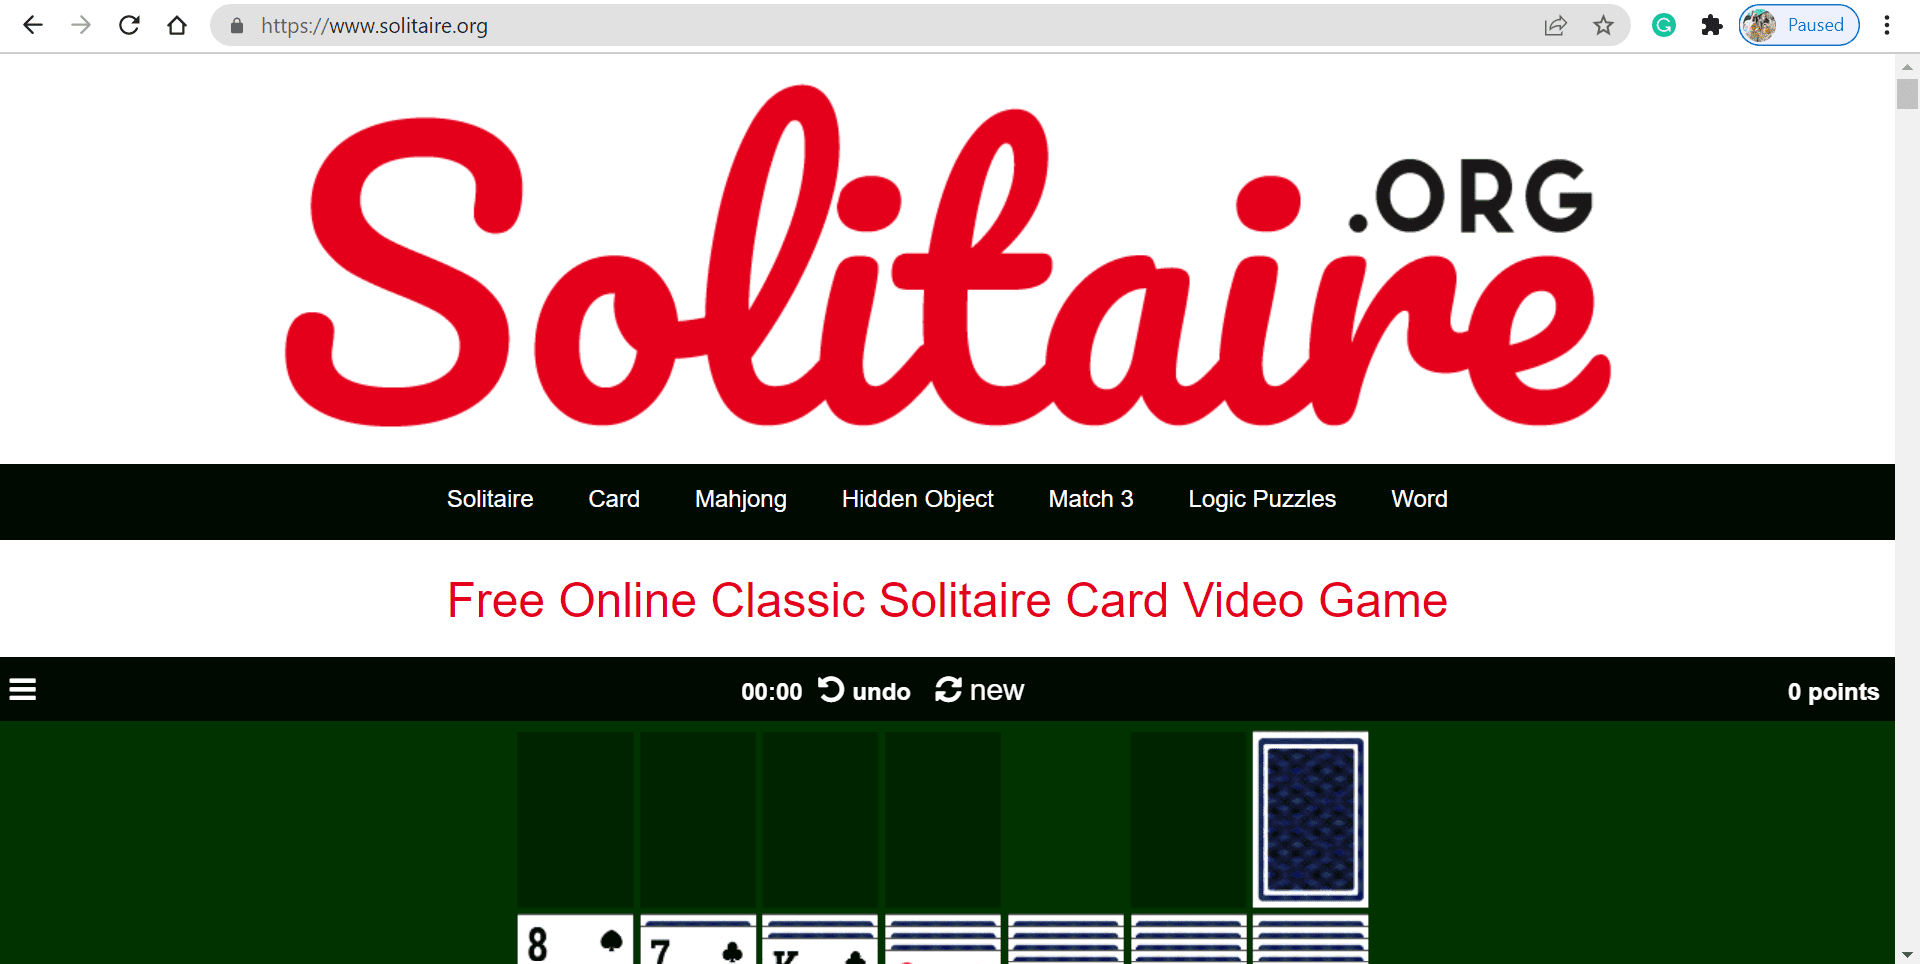 Five Things in February 2022 - Solitaire.org